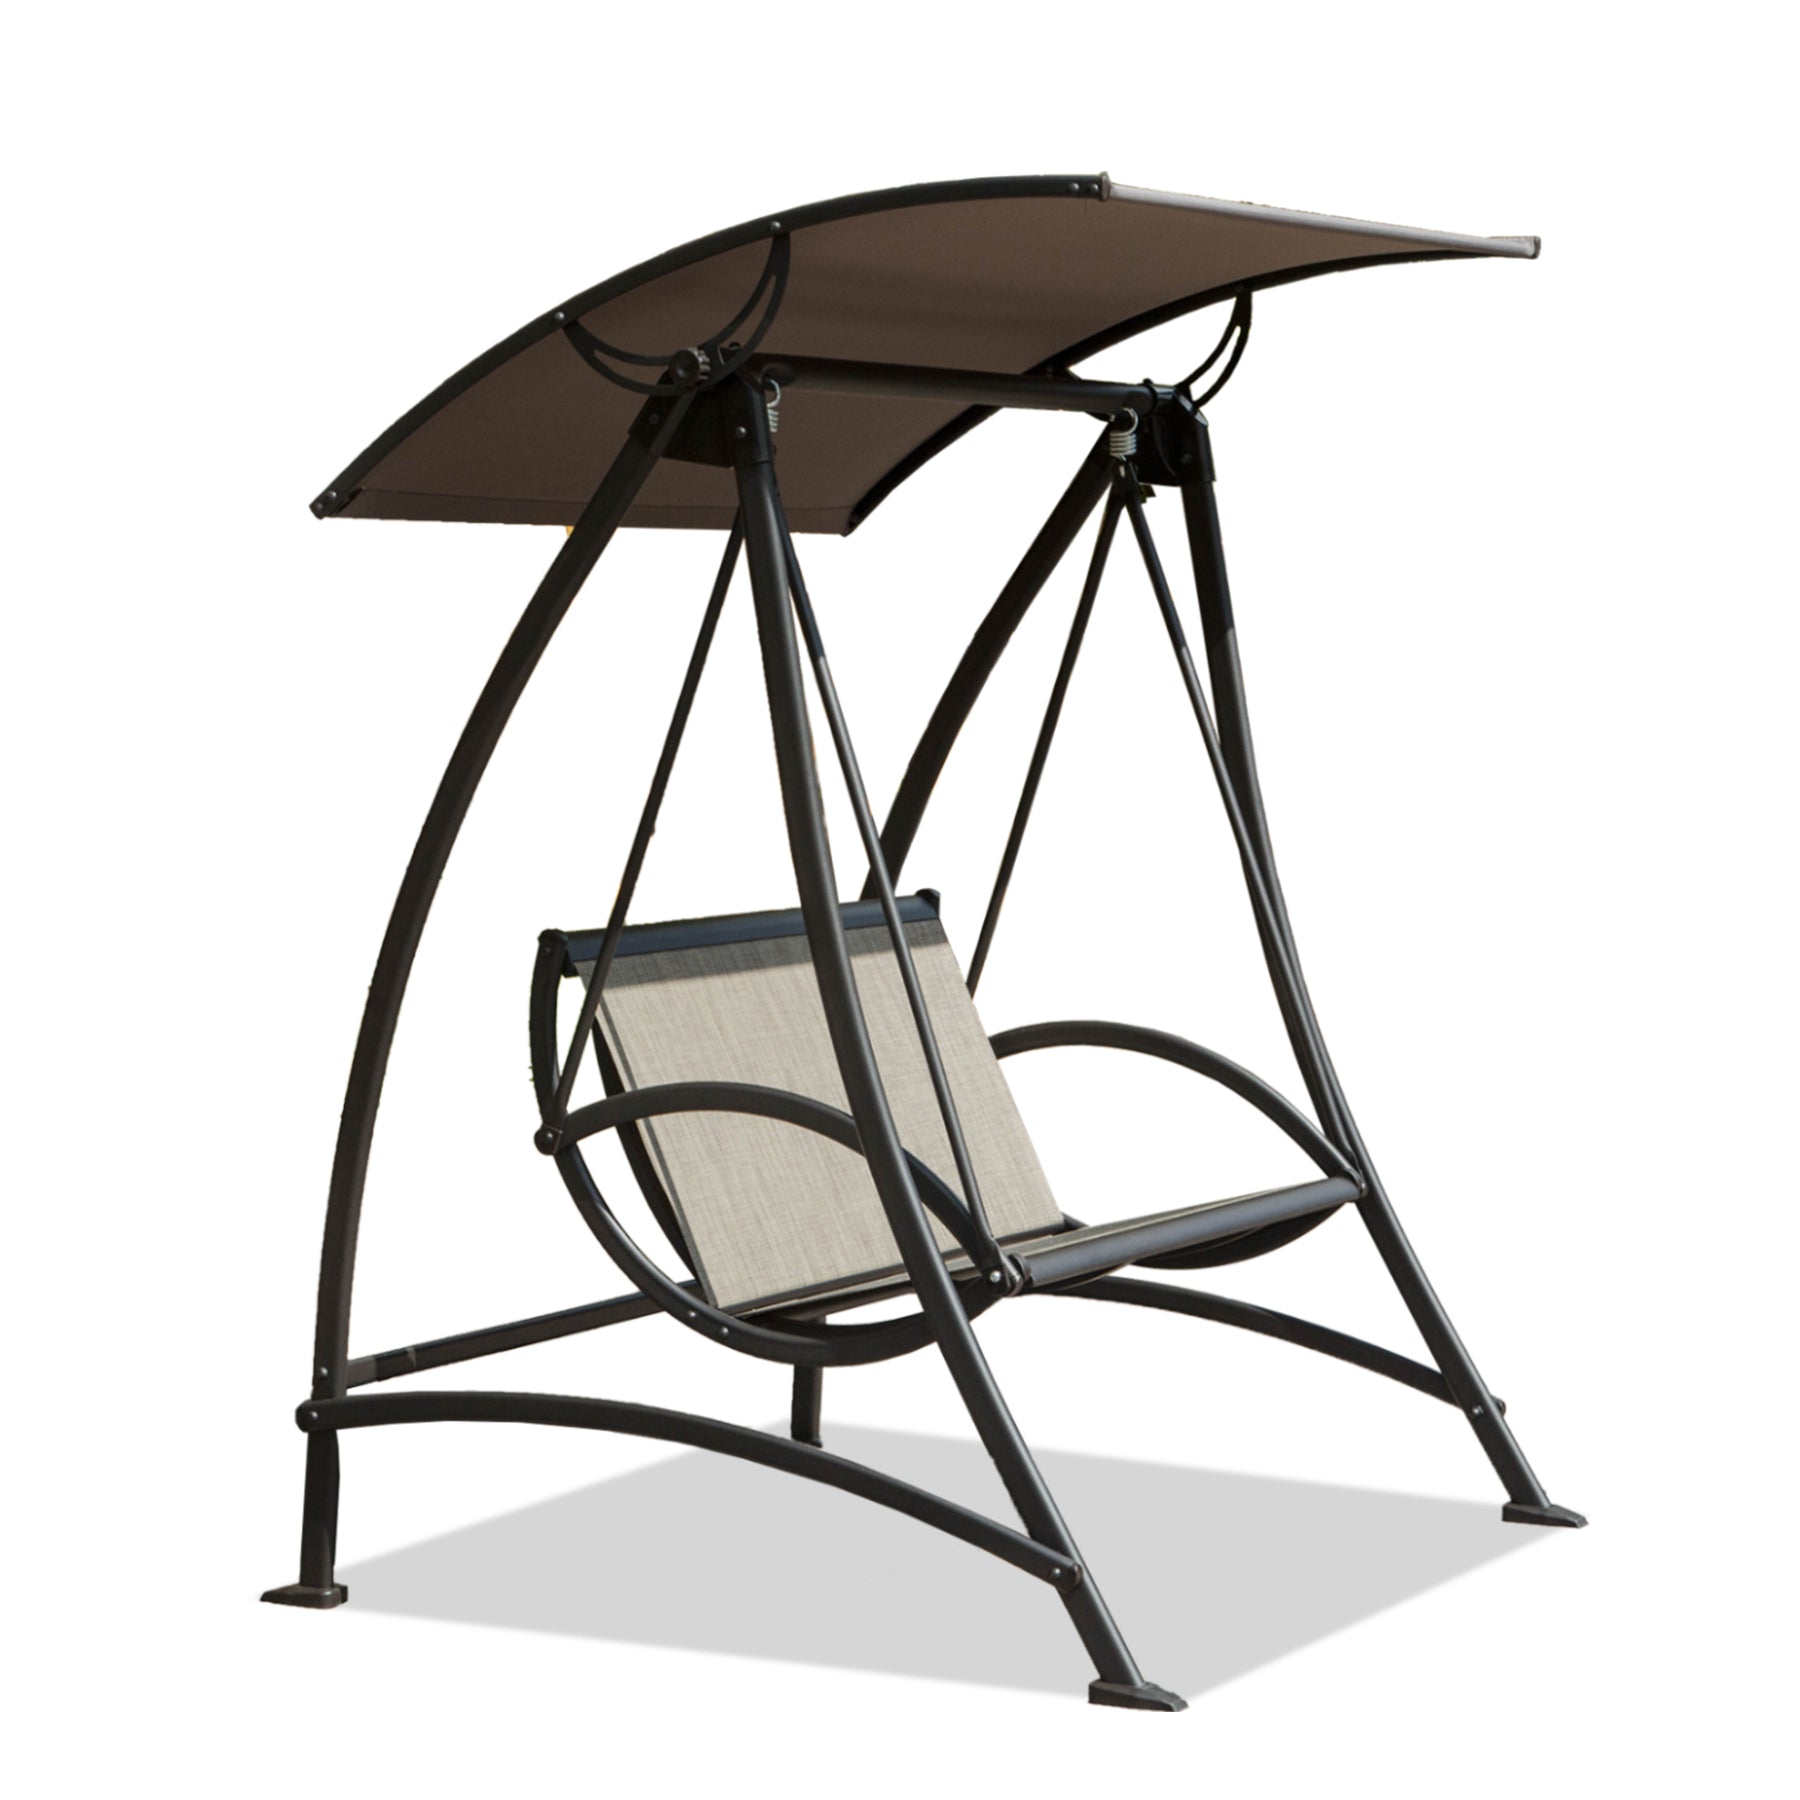 2-Seat-Outdoor-Porch-Swing-with-Adjustable-Canopy-Outdoor-Chairs